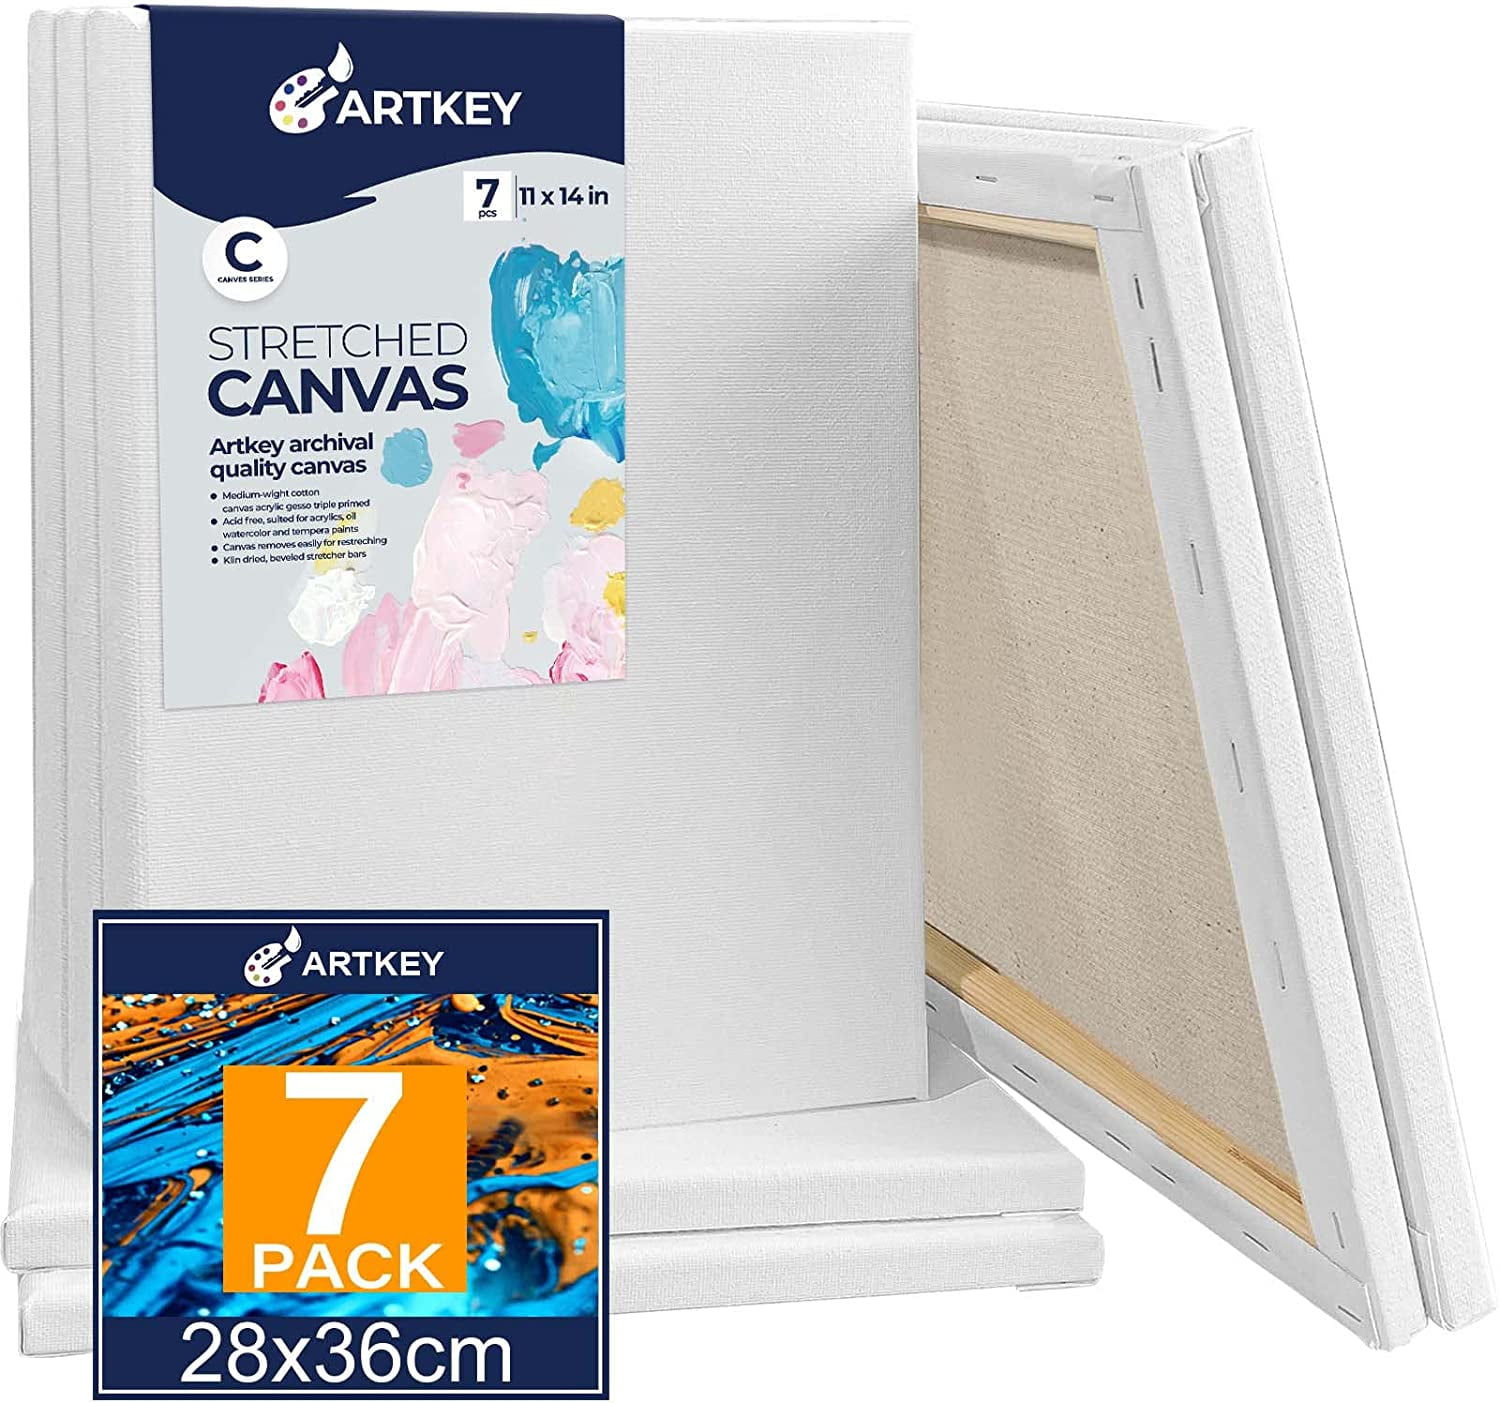 PHOENIX Painting Canvas Panels 11x14 Inch, 24 Bulk Pack - 8 Oz Triple  Primed 100% Cotton Acid Free Canvas Boards for Painting, White Blank Flat  Canvas